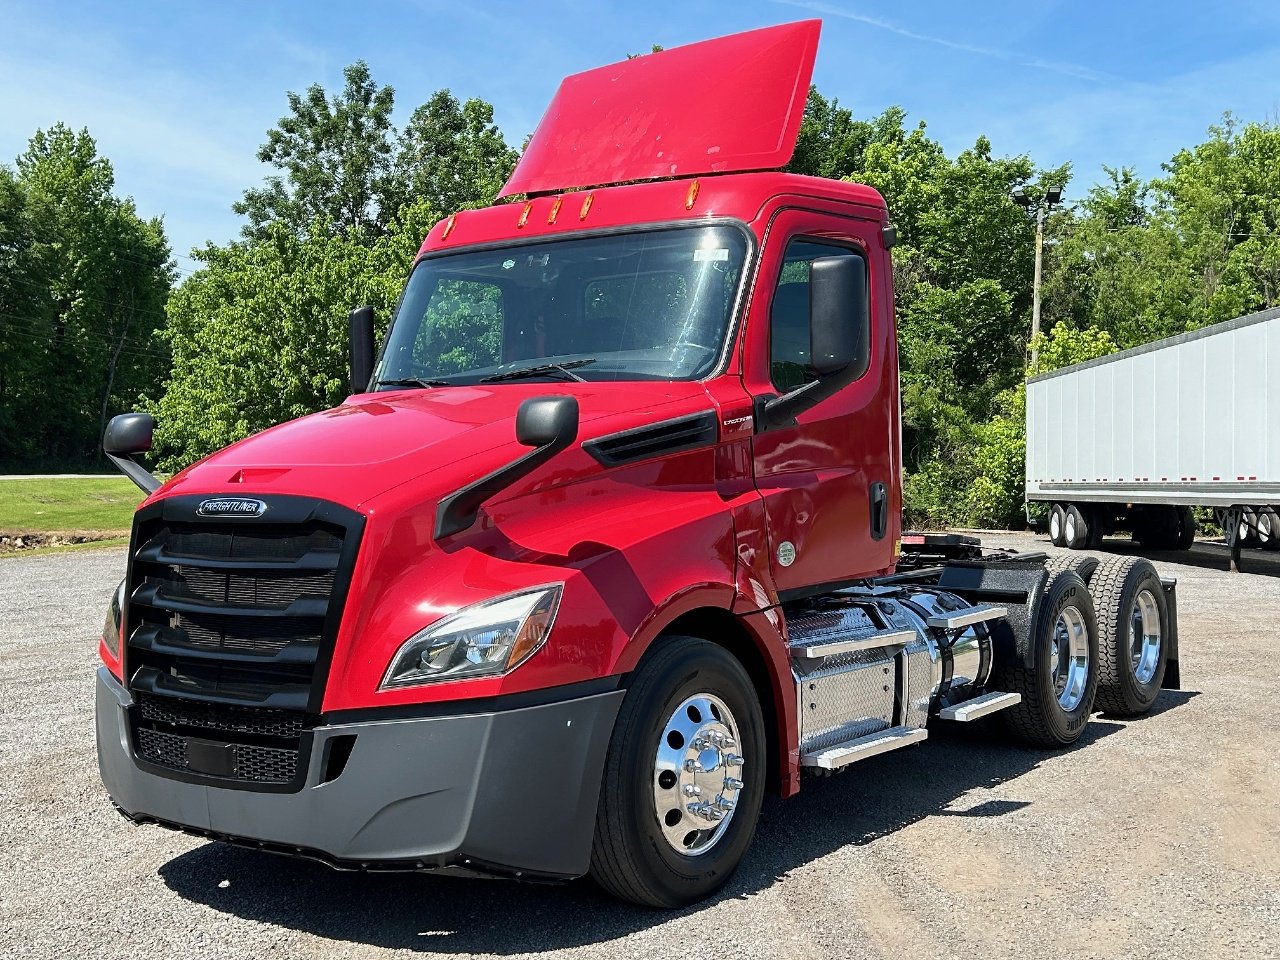 USED 2018 FREIGHTLINER CASCADIA TANDEM AXLE DAYCAB TRUCK #15258